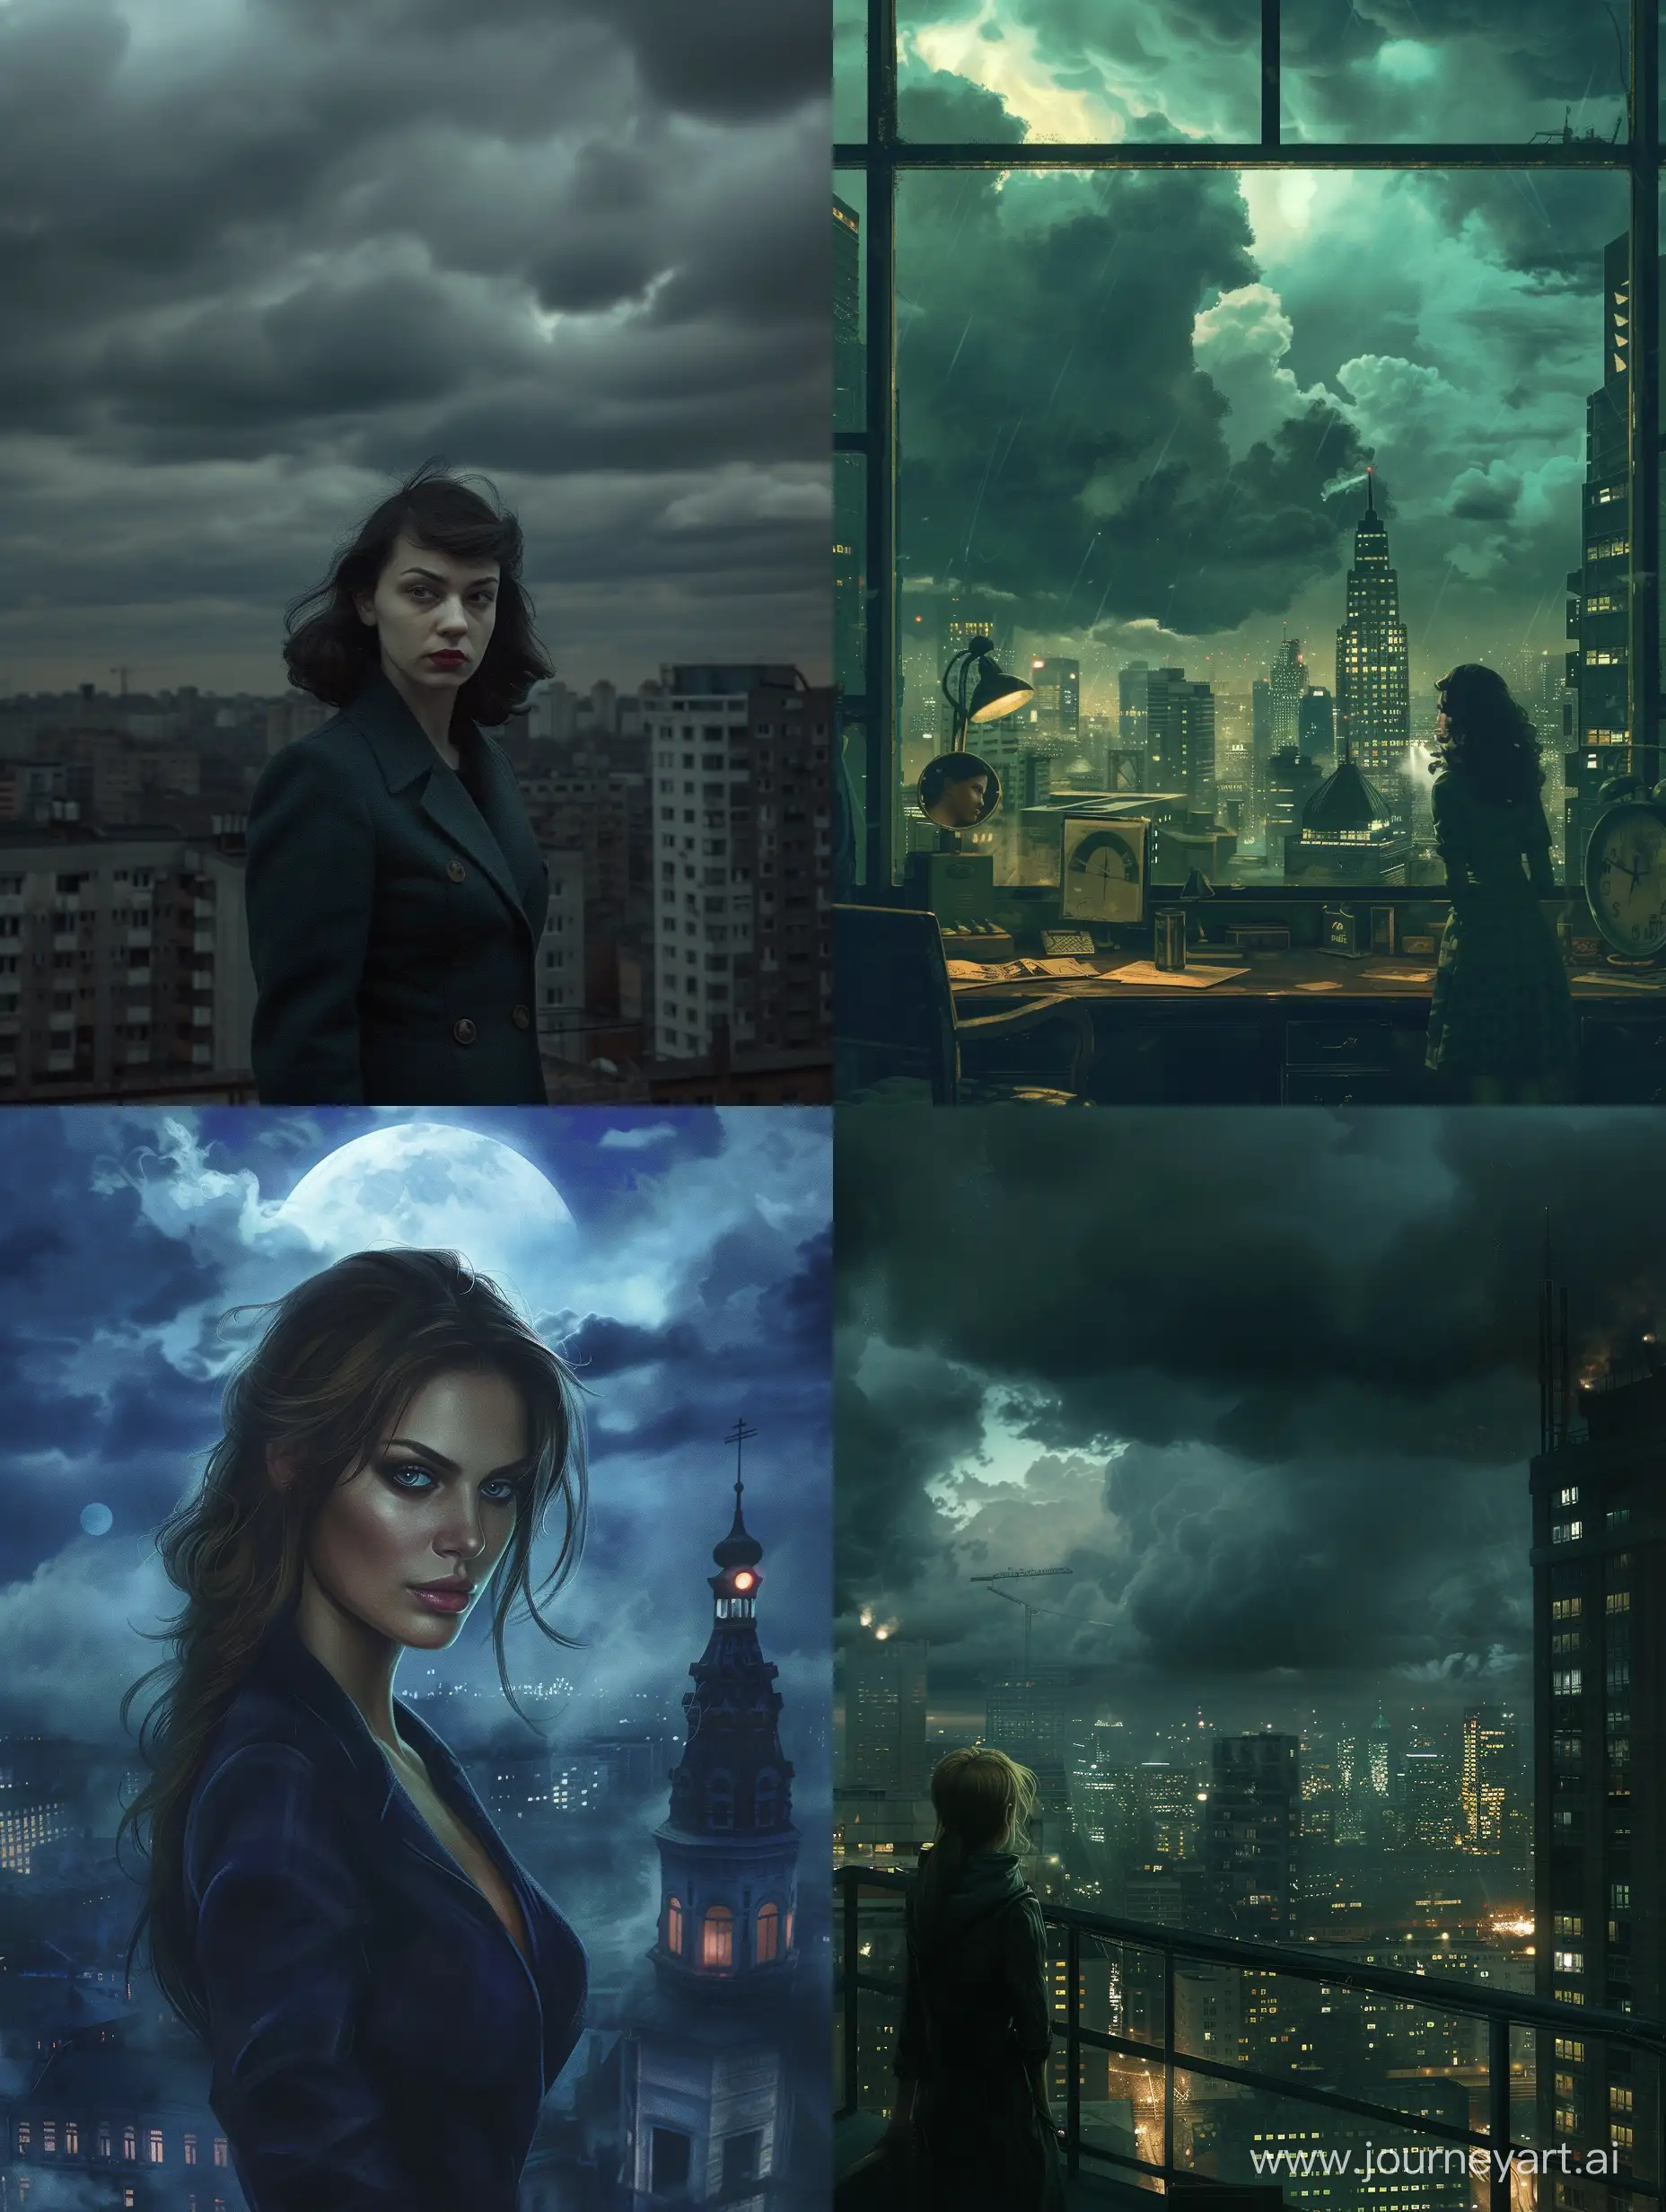 Mysterious-Meeting-Private-Detective-and-Client-in-a-Brooding-Cityscape